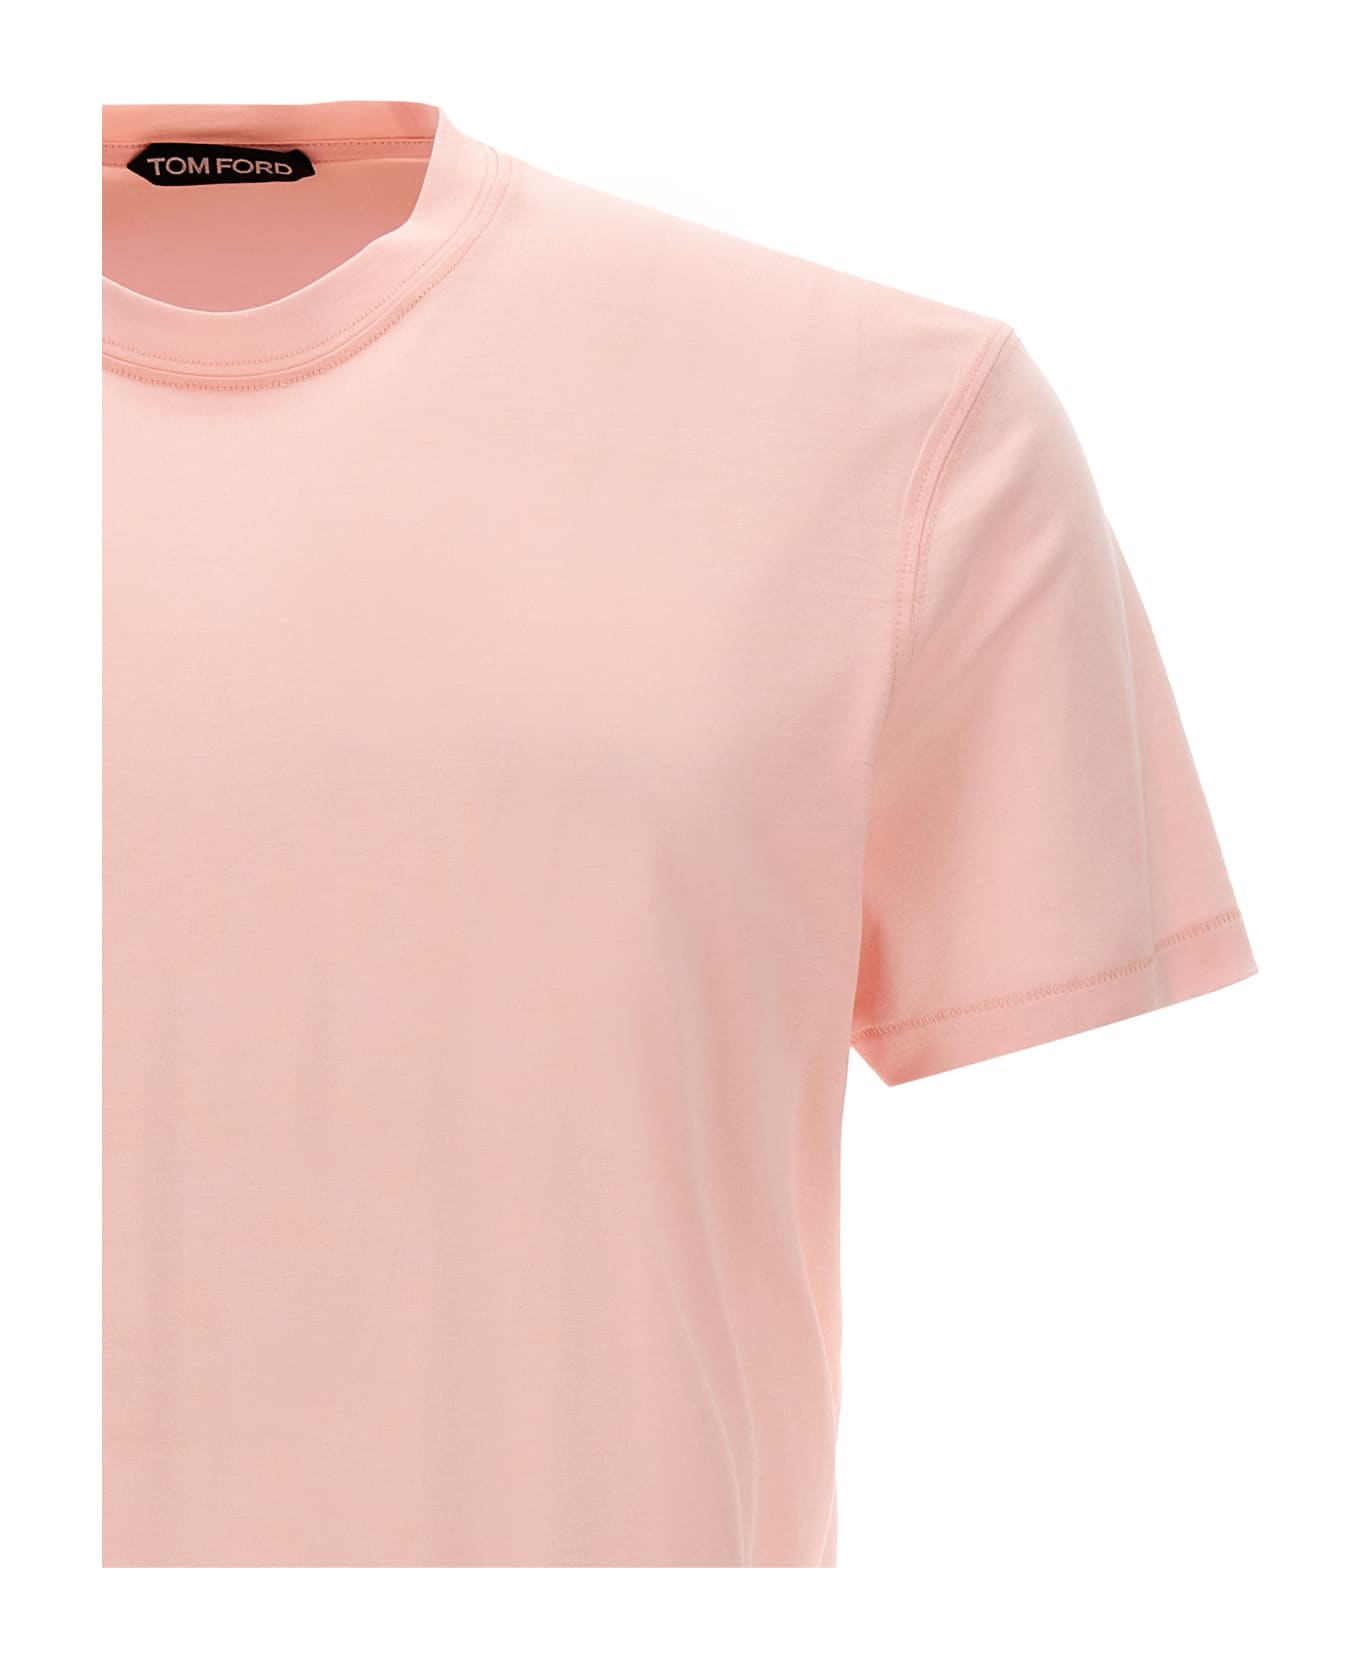 Tom Ford Lyoncell T-shirt - Pink